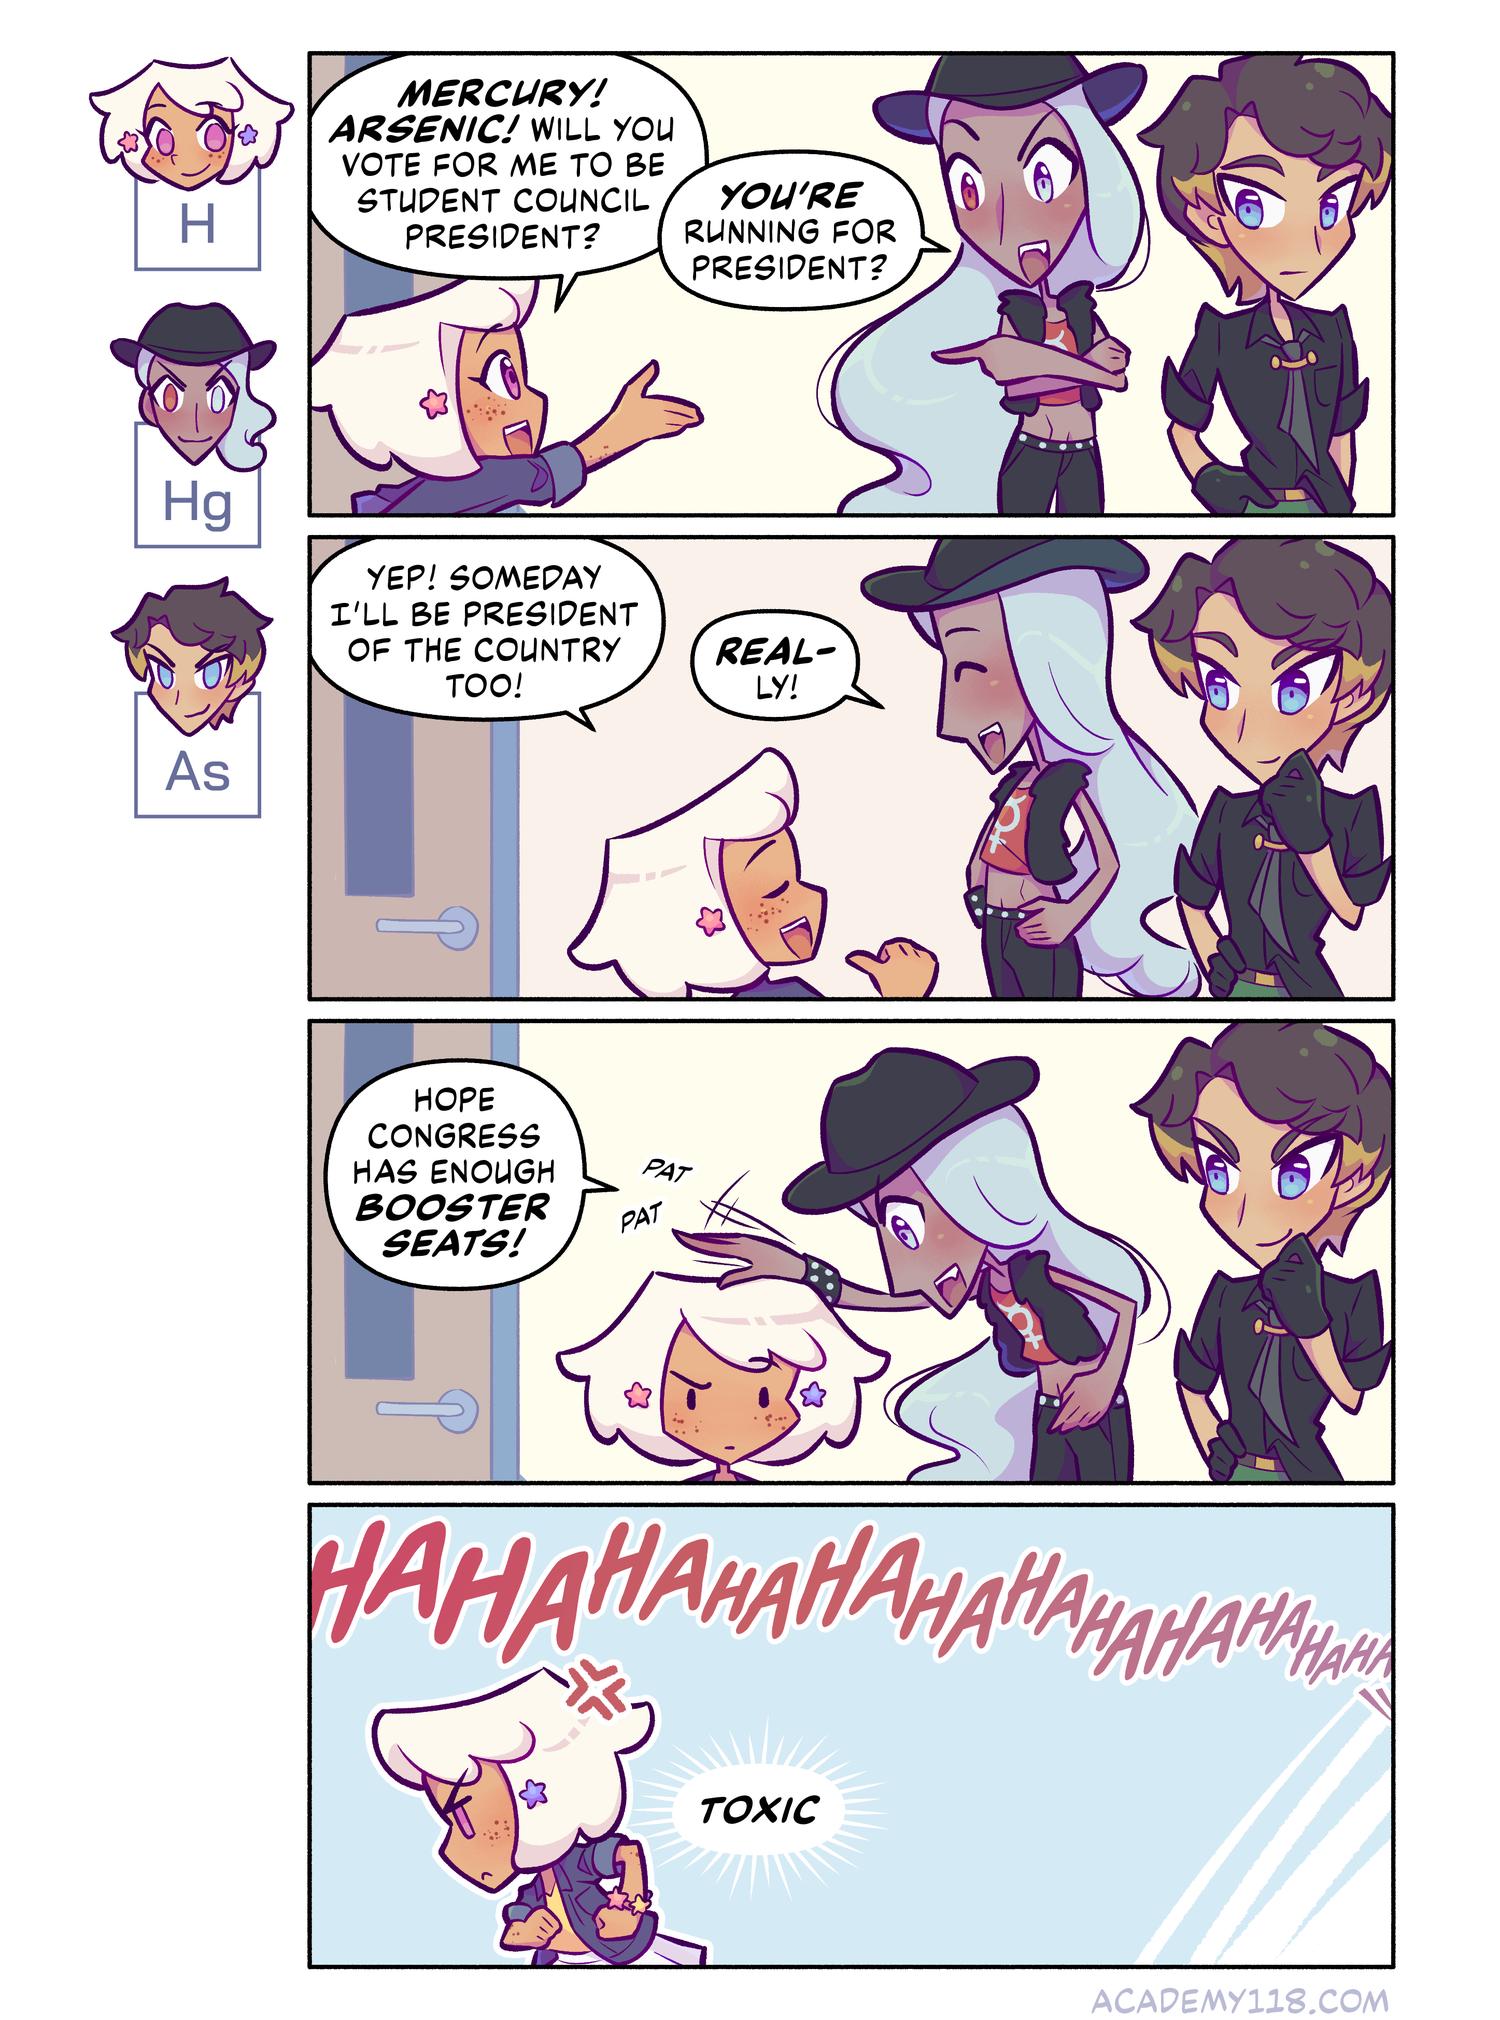 Hydrogen for President comic page 19